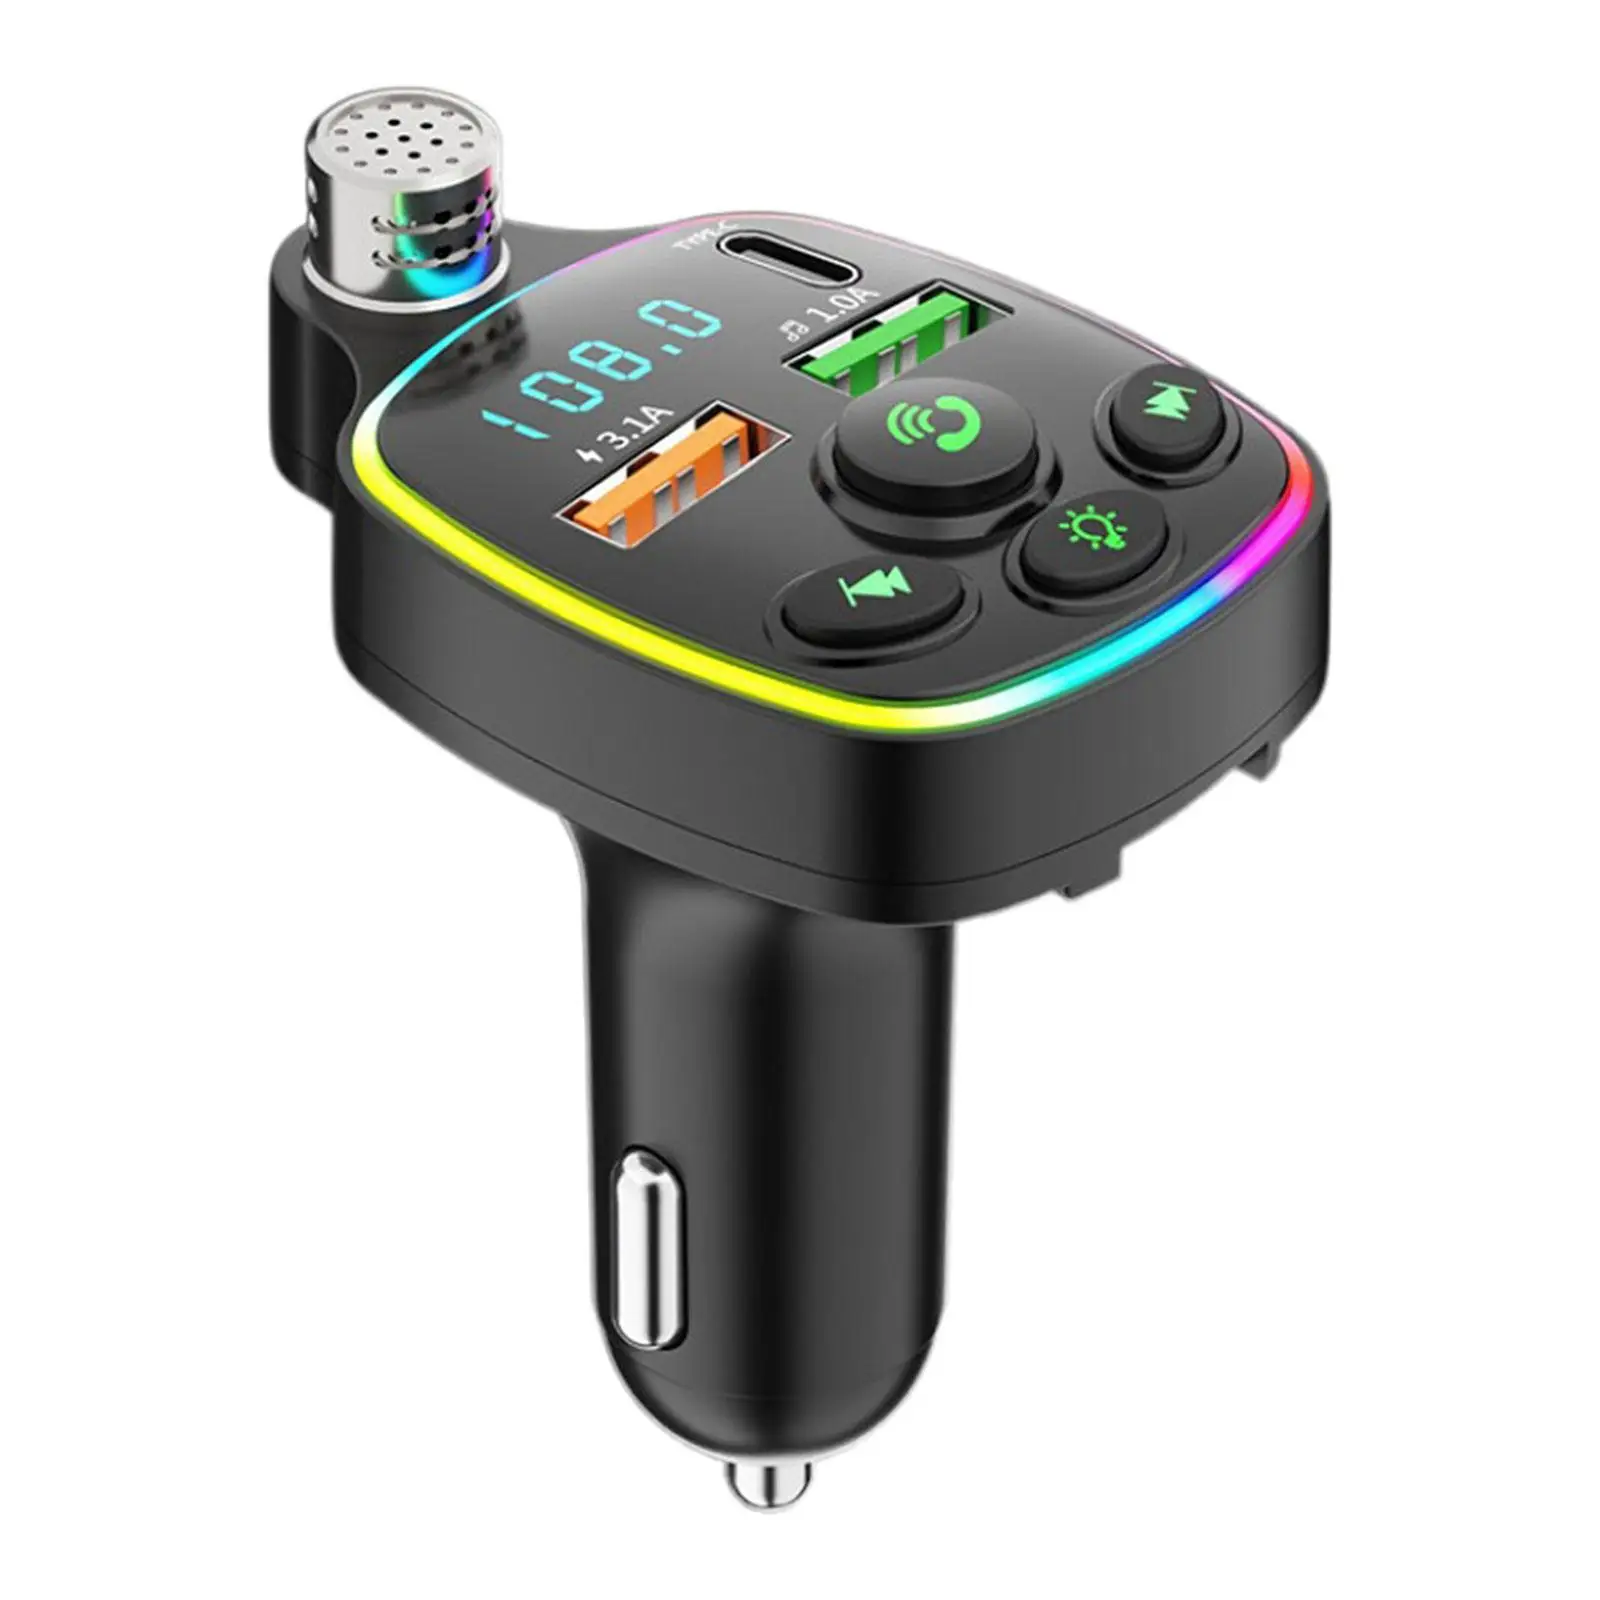 Car Adapter Fast Charging Handsfree Calling Portable LED Backlit LED Display USB and Type-c Ports Wireless FM Radio Transmitter